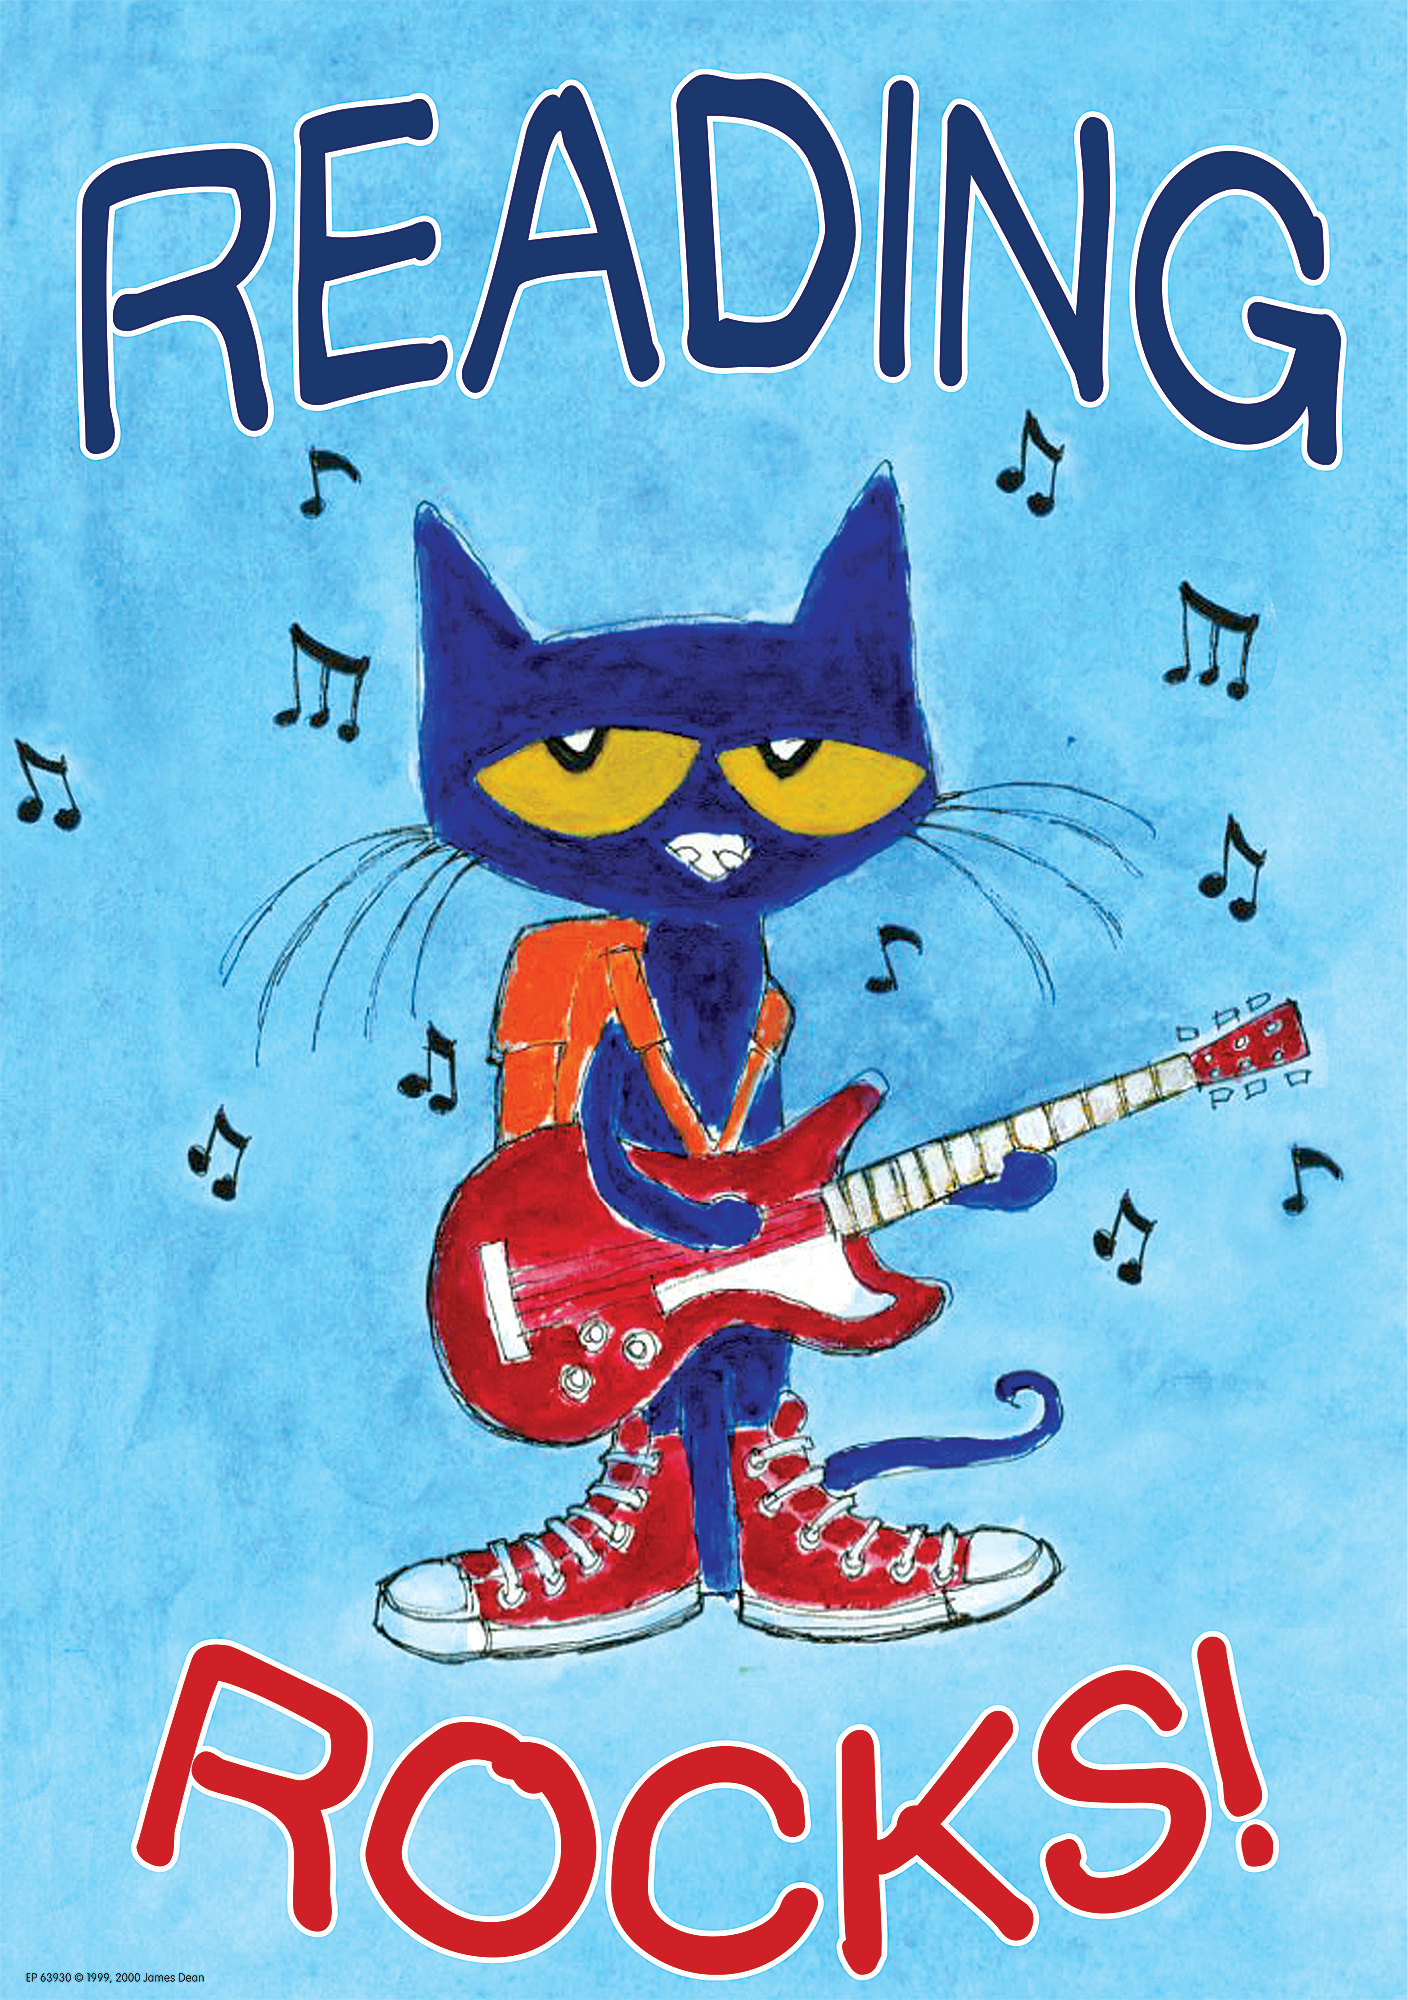 Pete the Cat® Reading Rocks Positive Poster